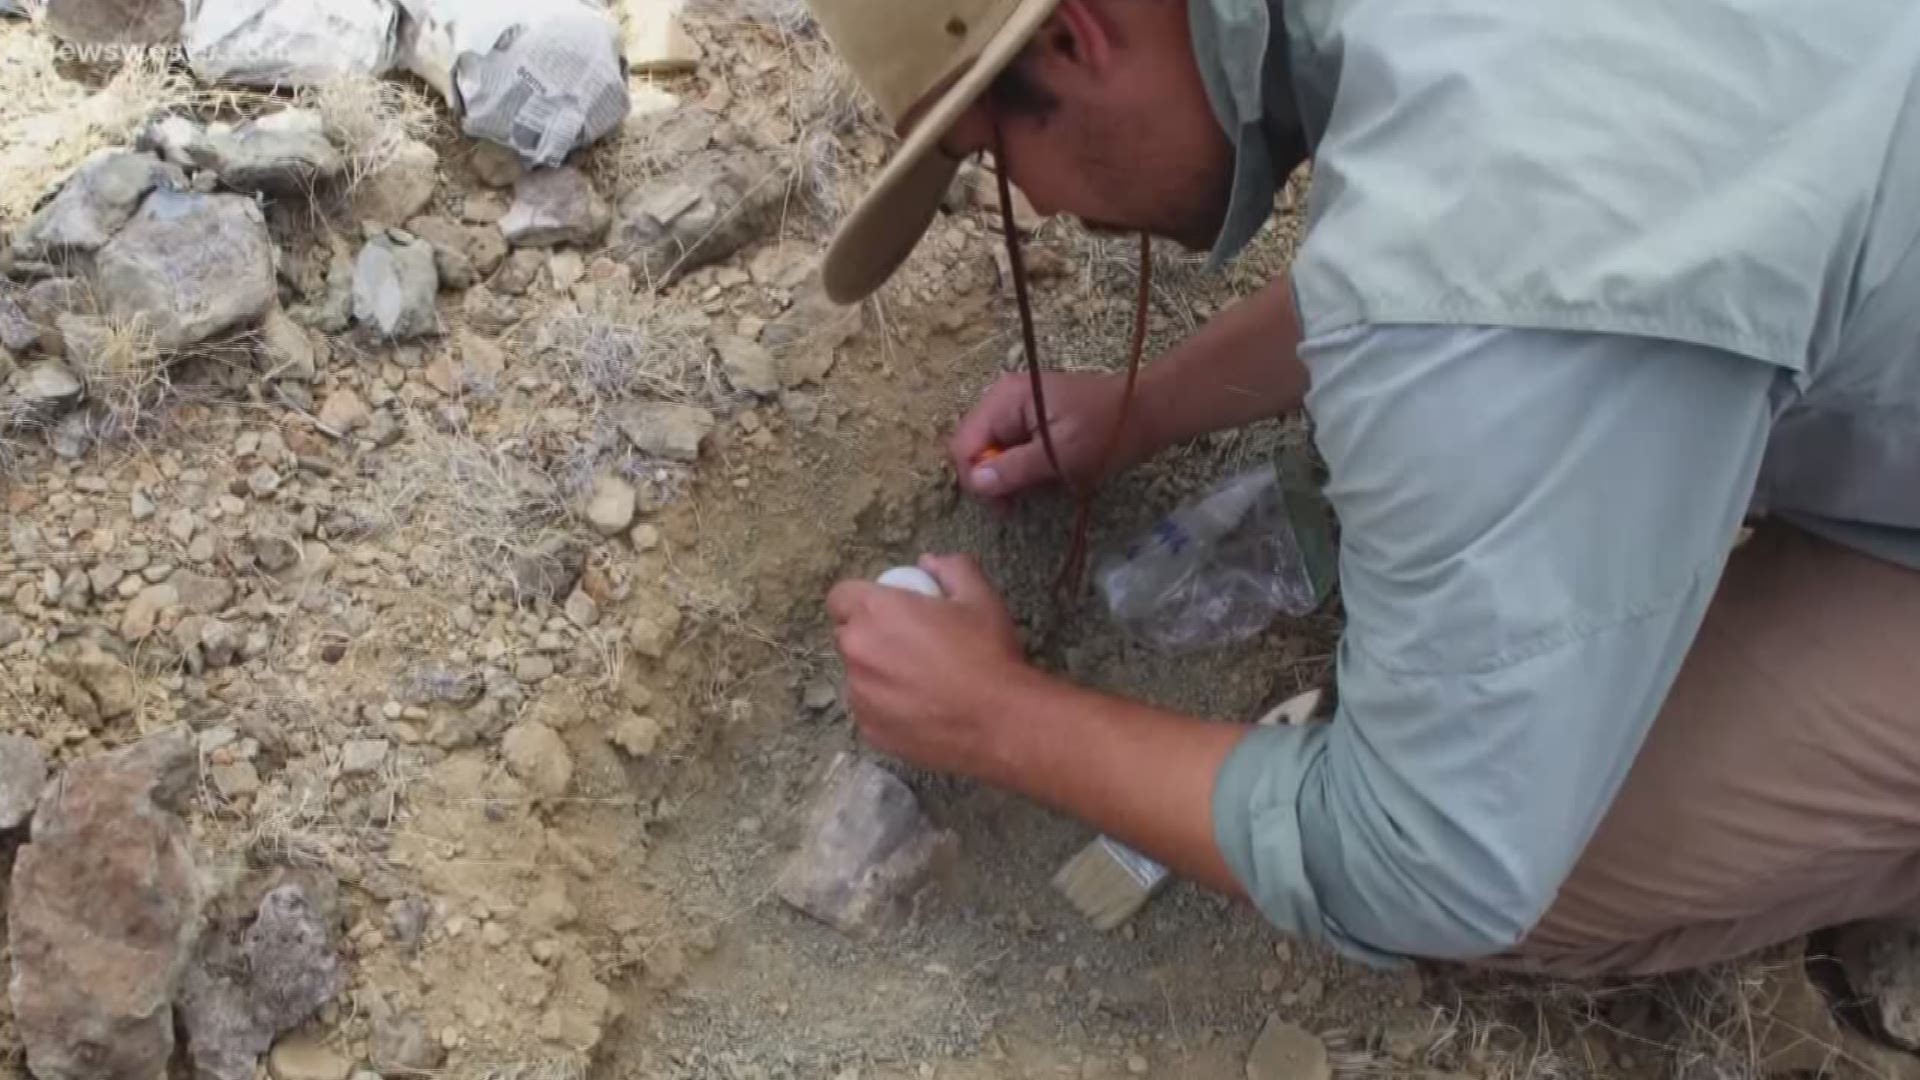 Dr. Thomas Shiller and Steve Wick met in Terlingua back in 2006, and have spent their careers digging up fossils in the Big Bend.